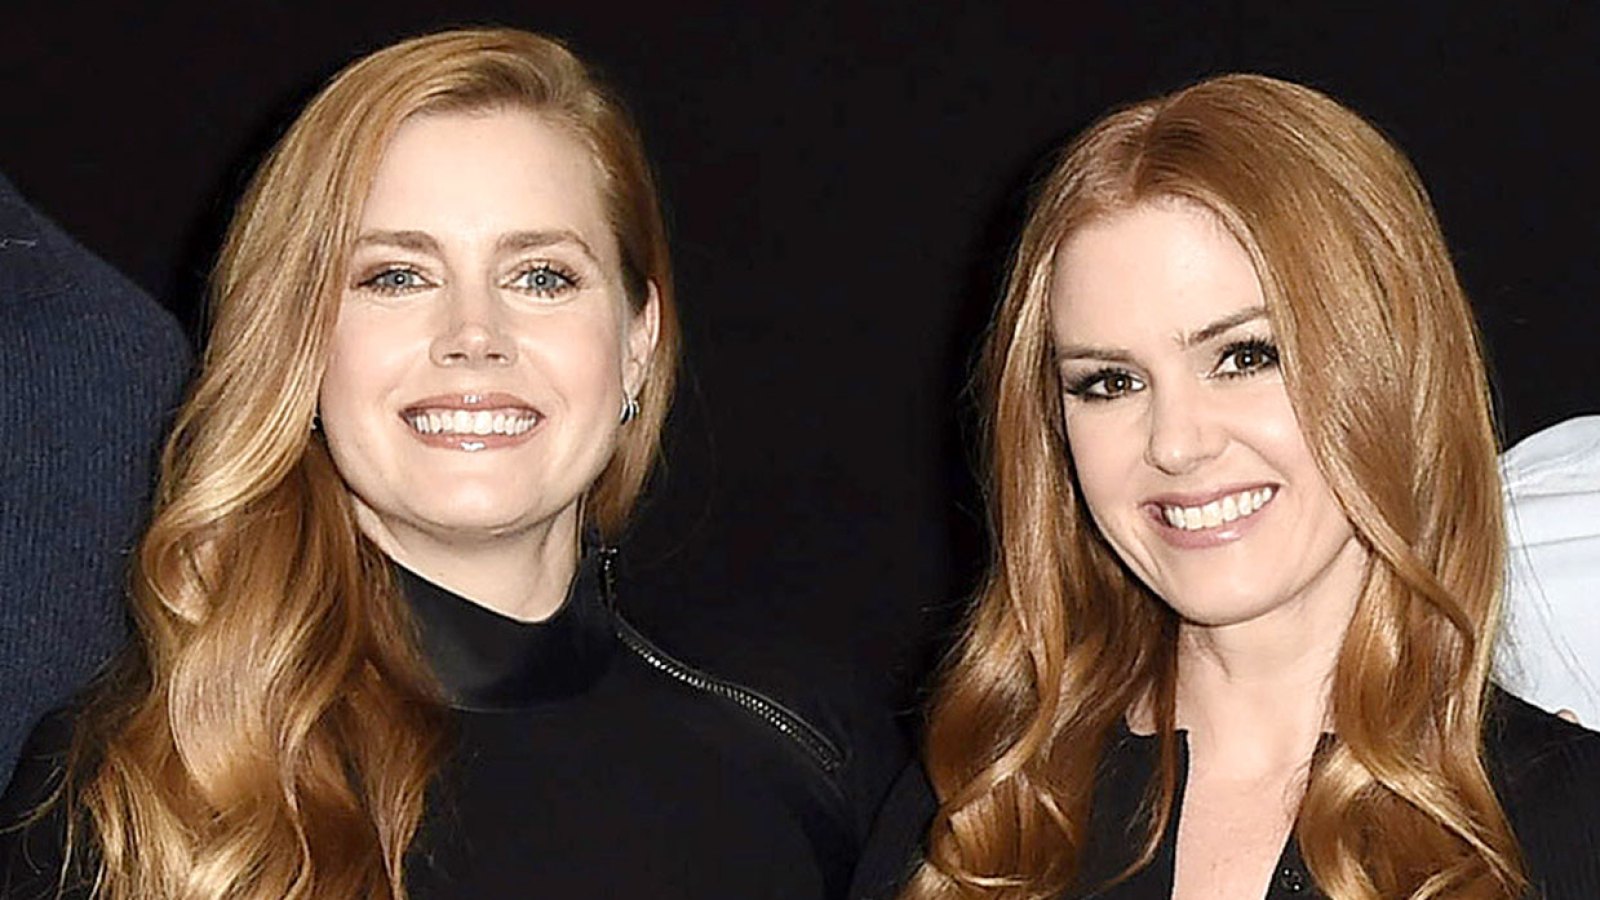 Isla Fisher Swapped Her Face With Amy Adams' on Holiday Card